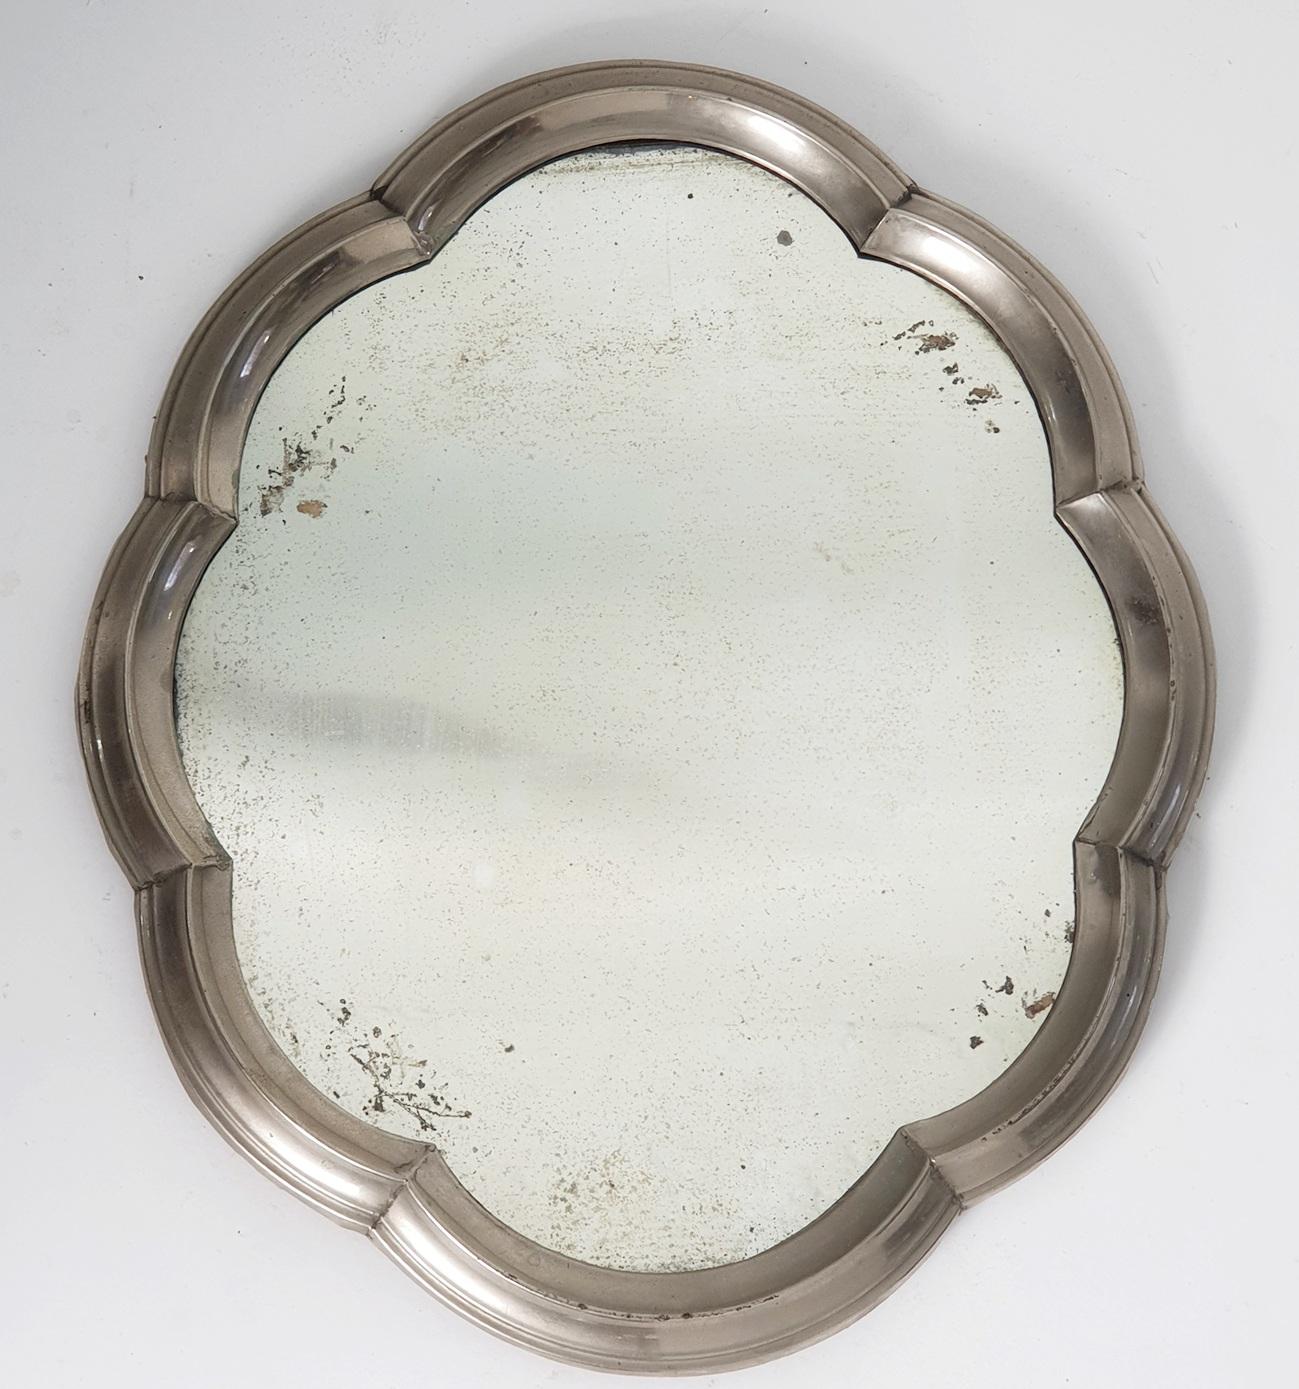 This is a unusual mirror made for decorating the table. The mirror is made with a frame in pewter in baroque style and with the original mirror glass still in place. It stands on small feet giving a bit of height from the table. The glass has beauty